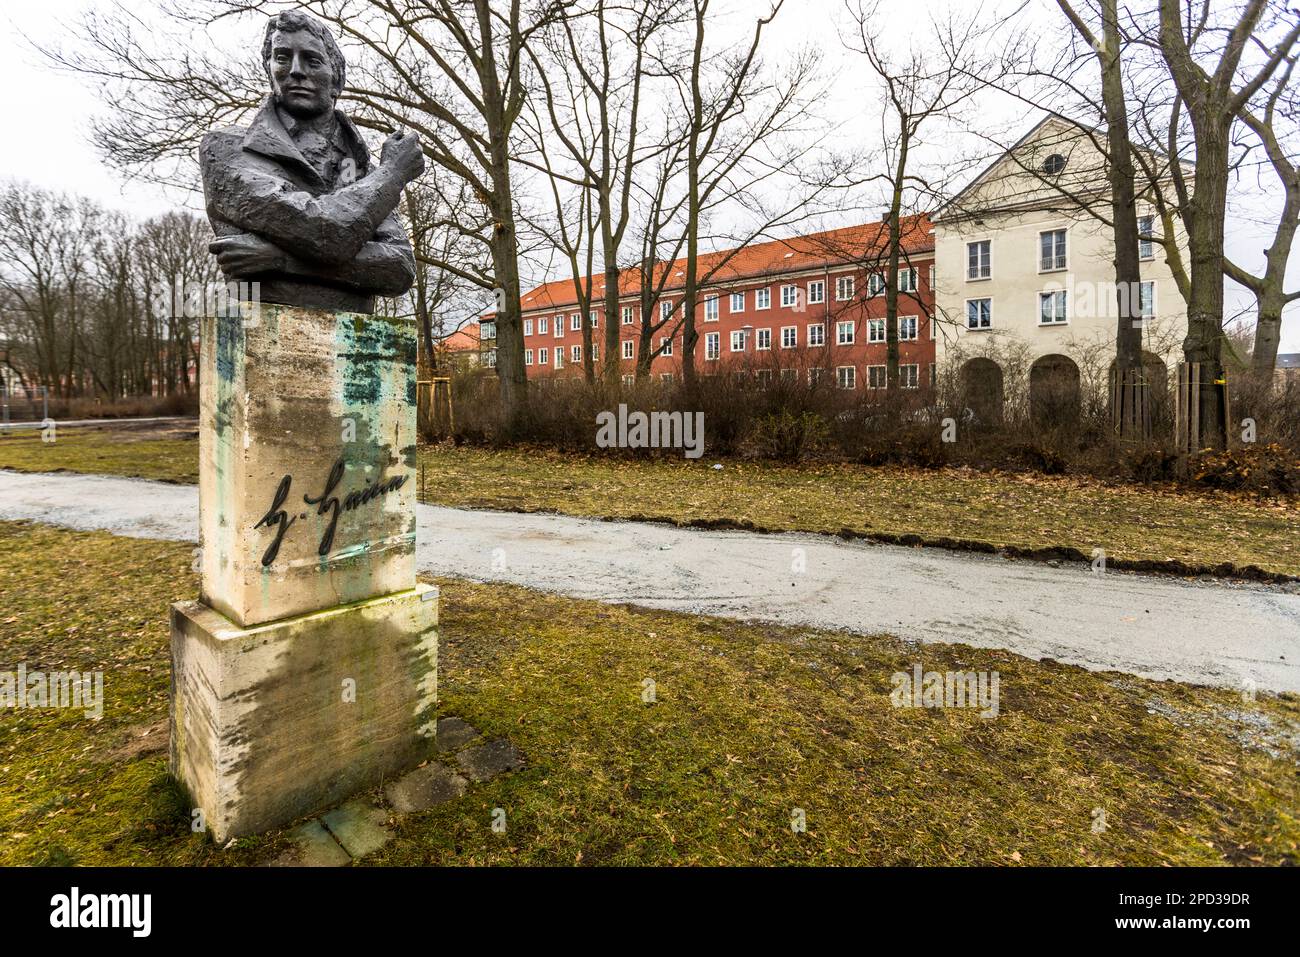 Bust of Heinrich Heine in residential complex III in Eisenhüttenstadt. Between 3 and 5 percent of the construction sum was art-bound in the planned city of Eisenhüttenstadt. Eisenhüttenstadt, Germany Stock Photo